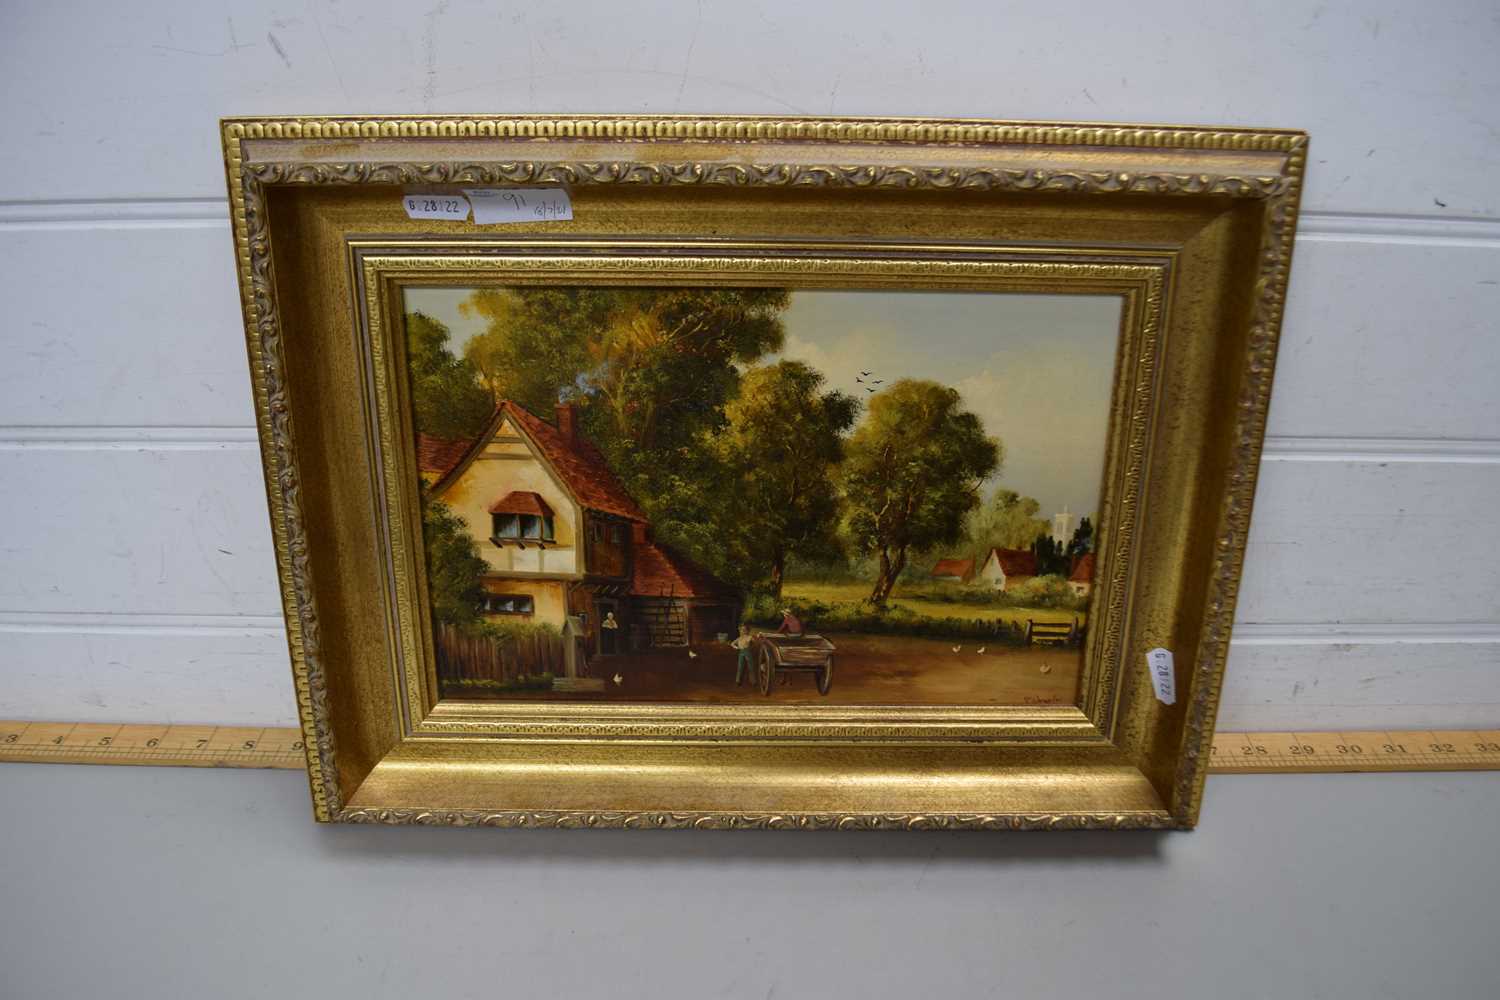 M J DOUGLAS, STUDY OF VILLAGE SCENE WITH HORSE AND CART, OIL ON BOARD, GILT FRAMED